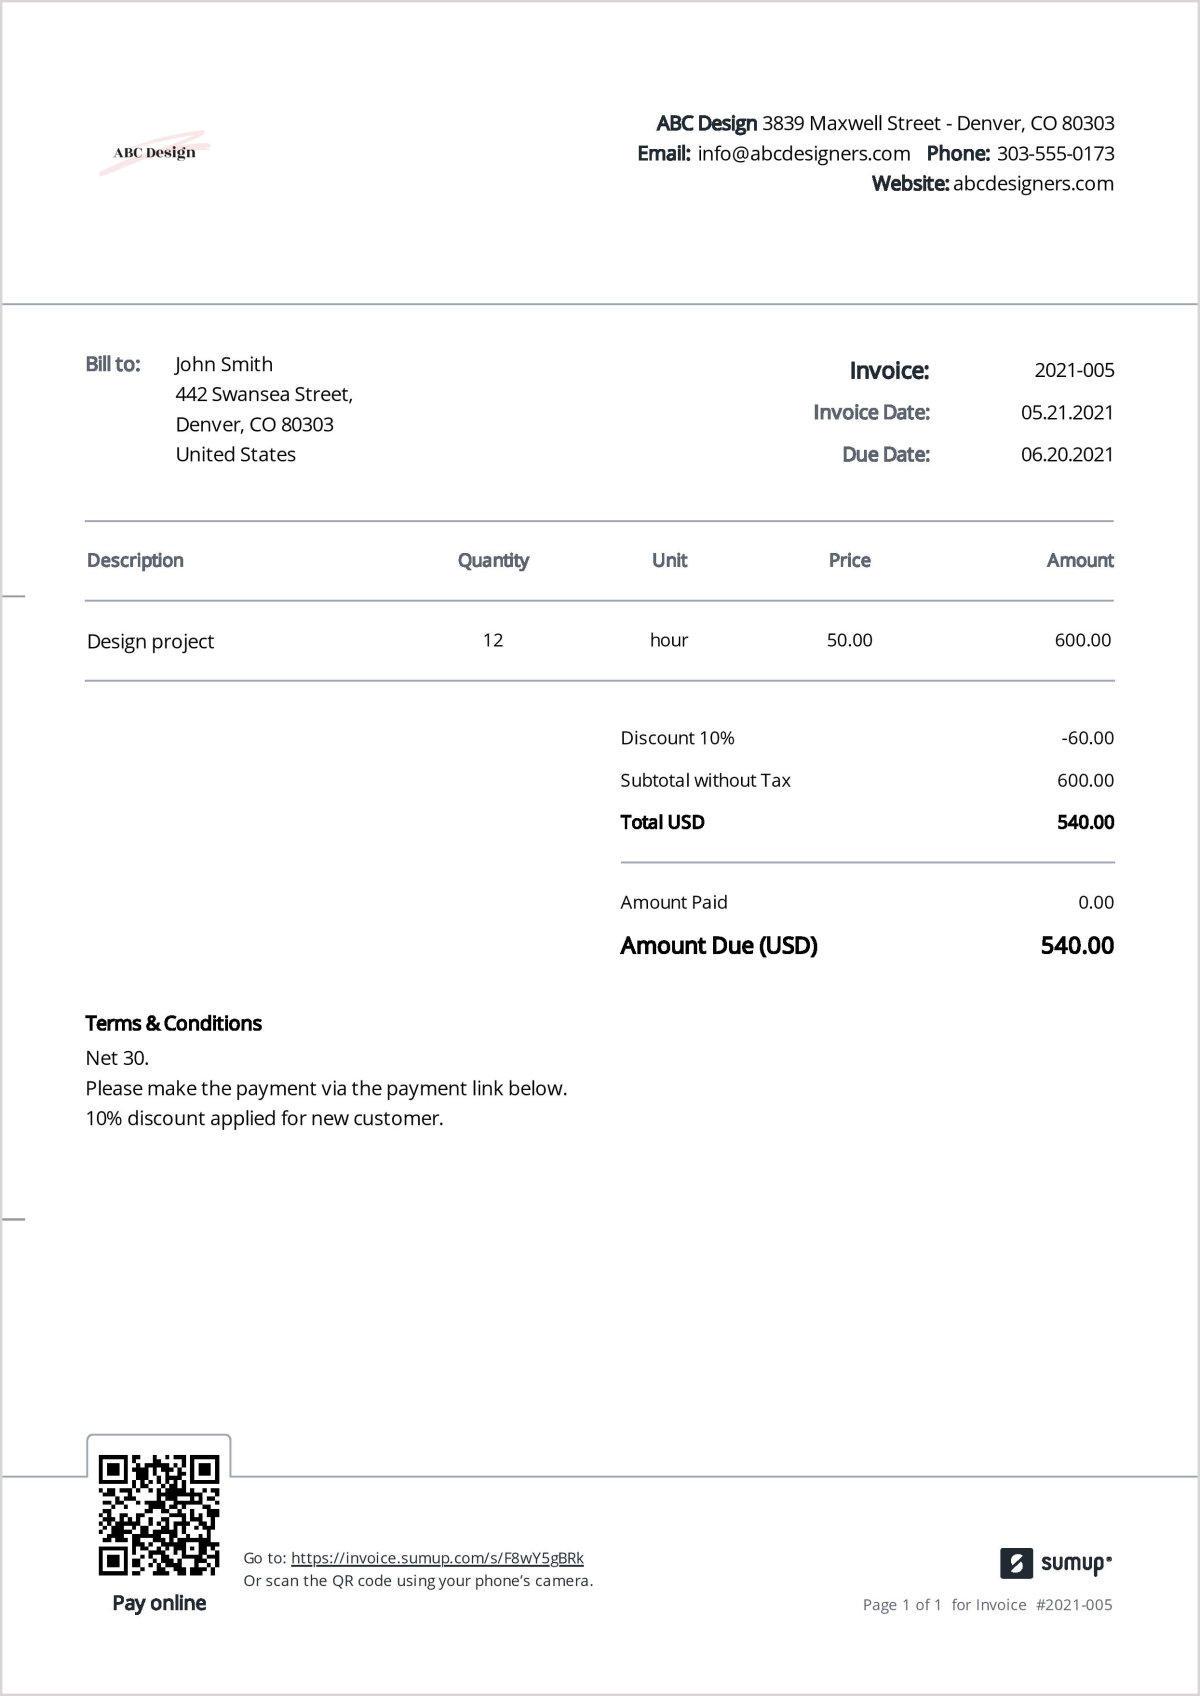 Sample invoice with payment terms